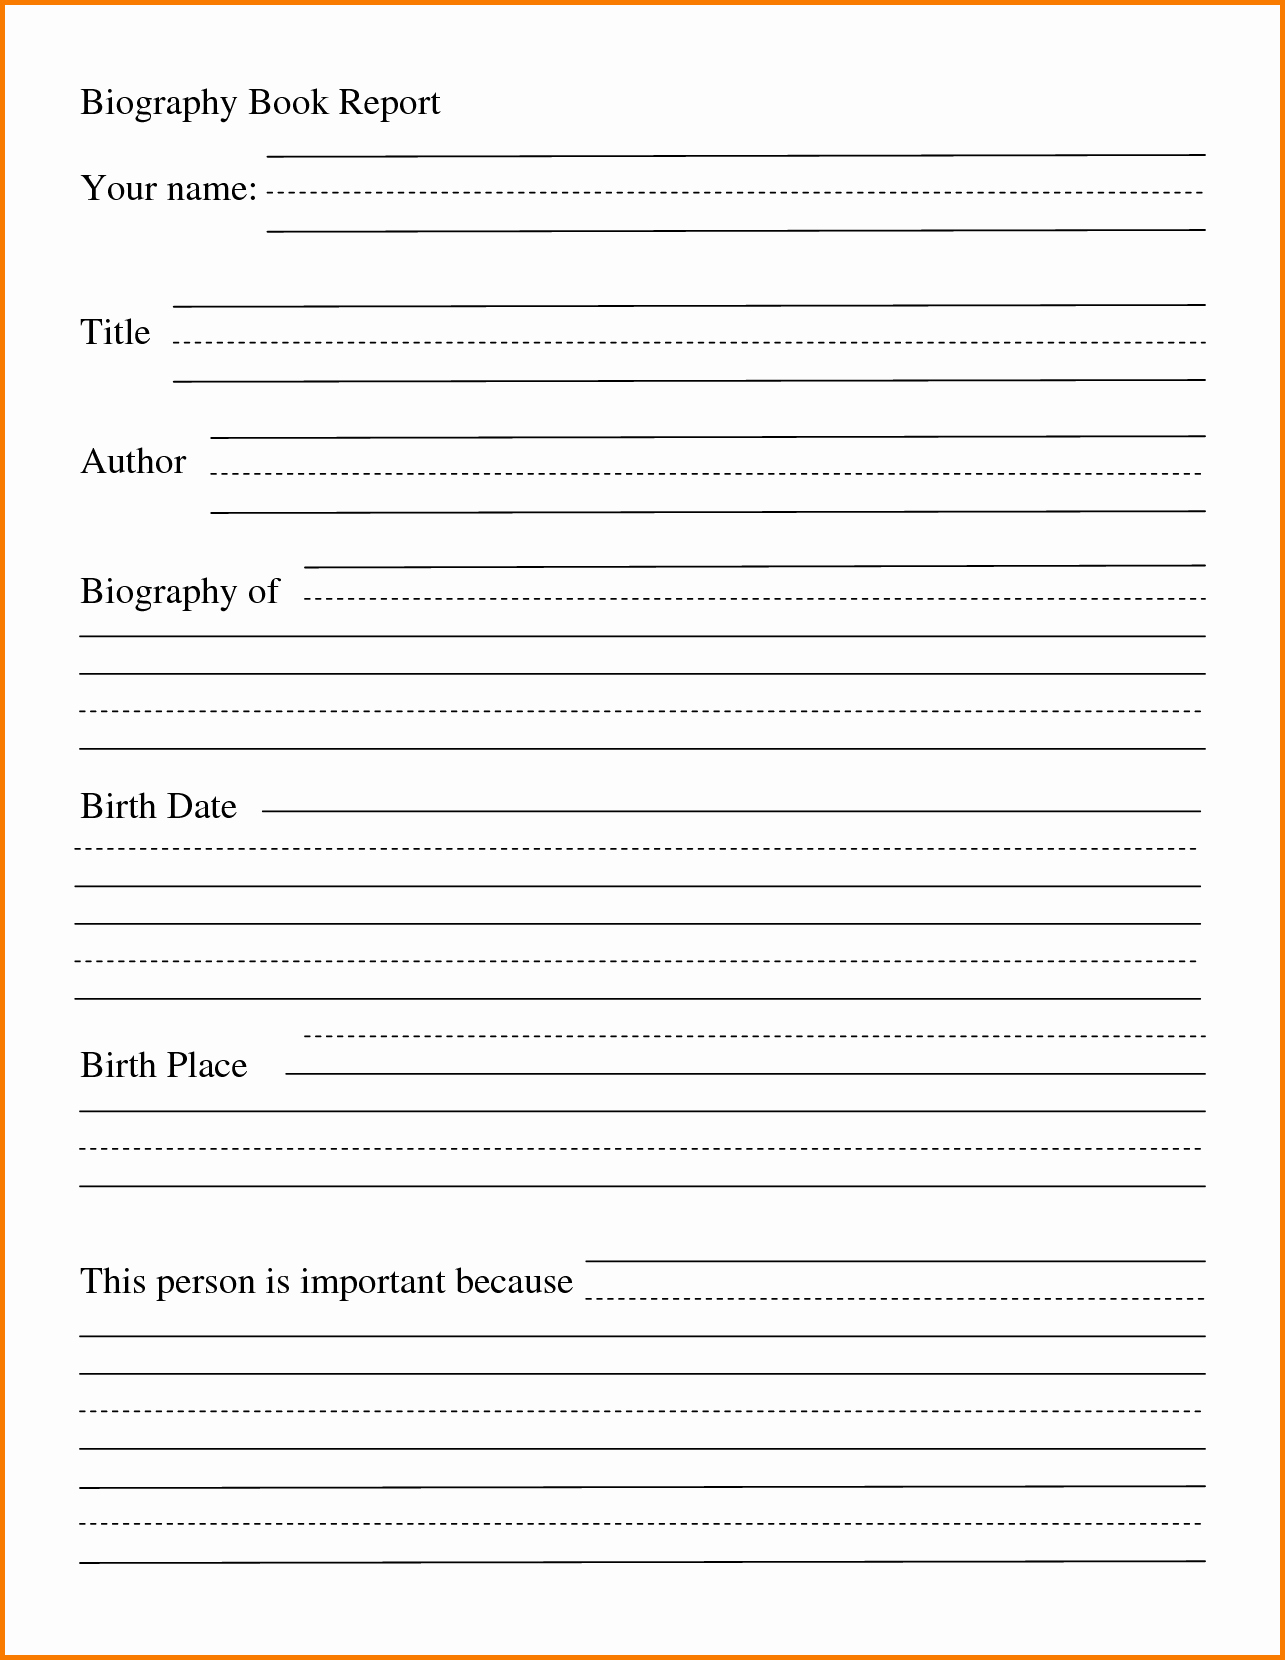 Free Printable Biography Book Report form